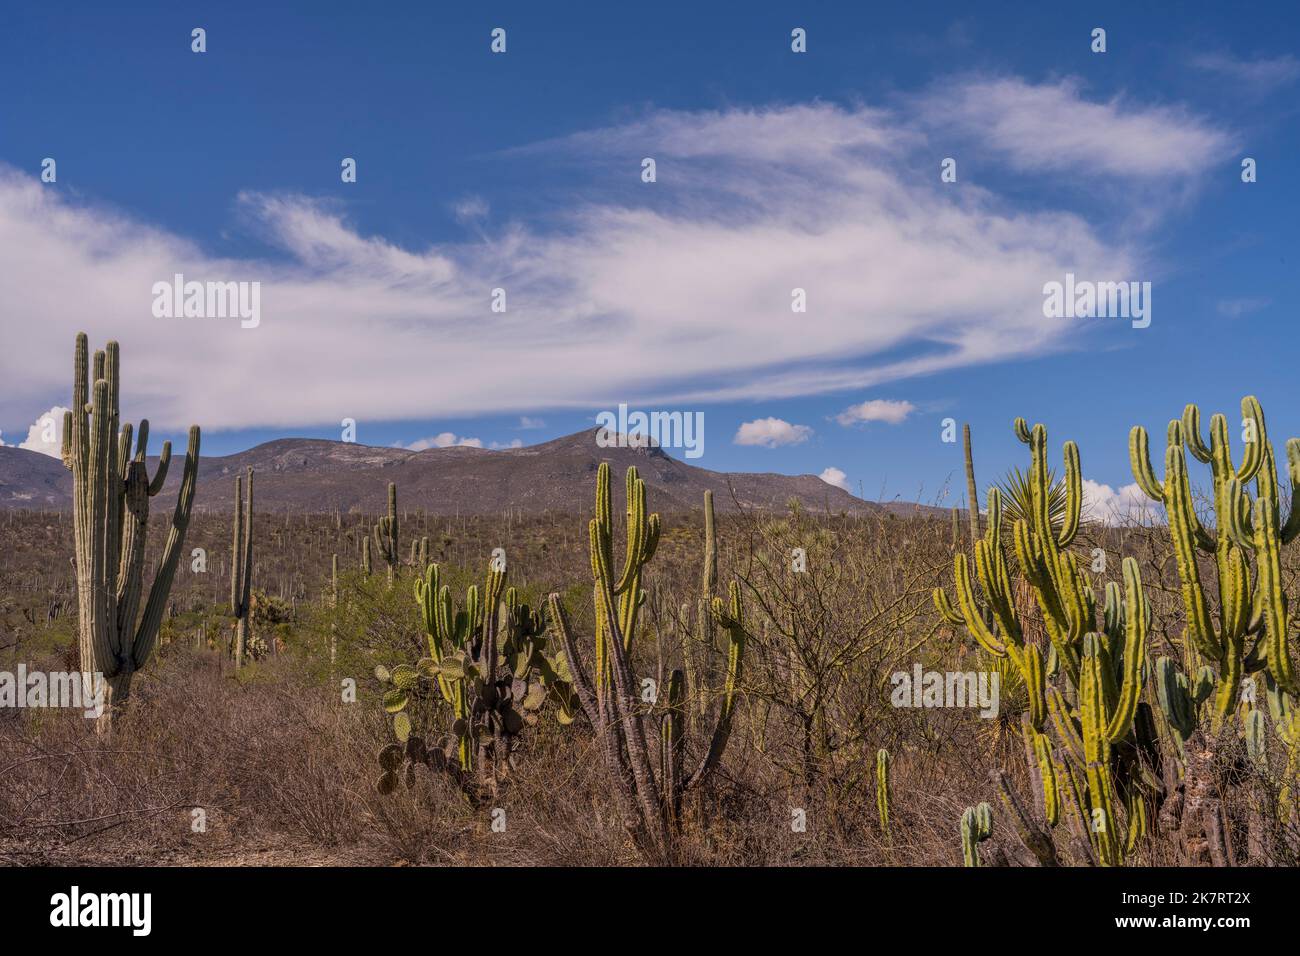 Landscape with cacti, including Opuntia streptacantha (Nopal), at the Tehuacan-Cuicatlan Biosphere Reserve (UNESCO World Heritage Site) near the villa Stock Photo